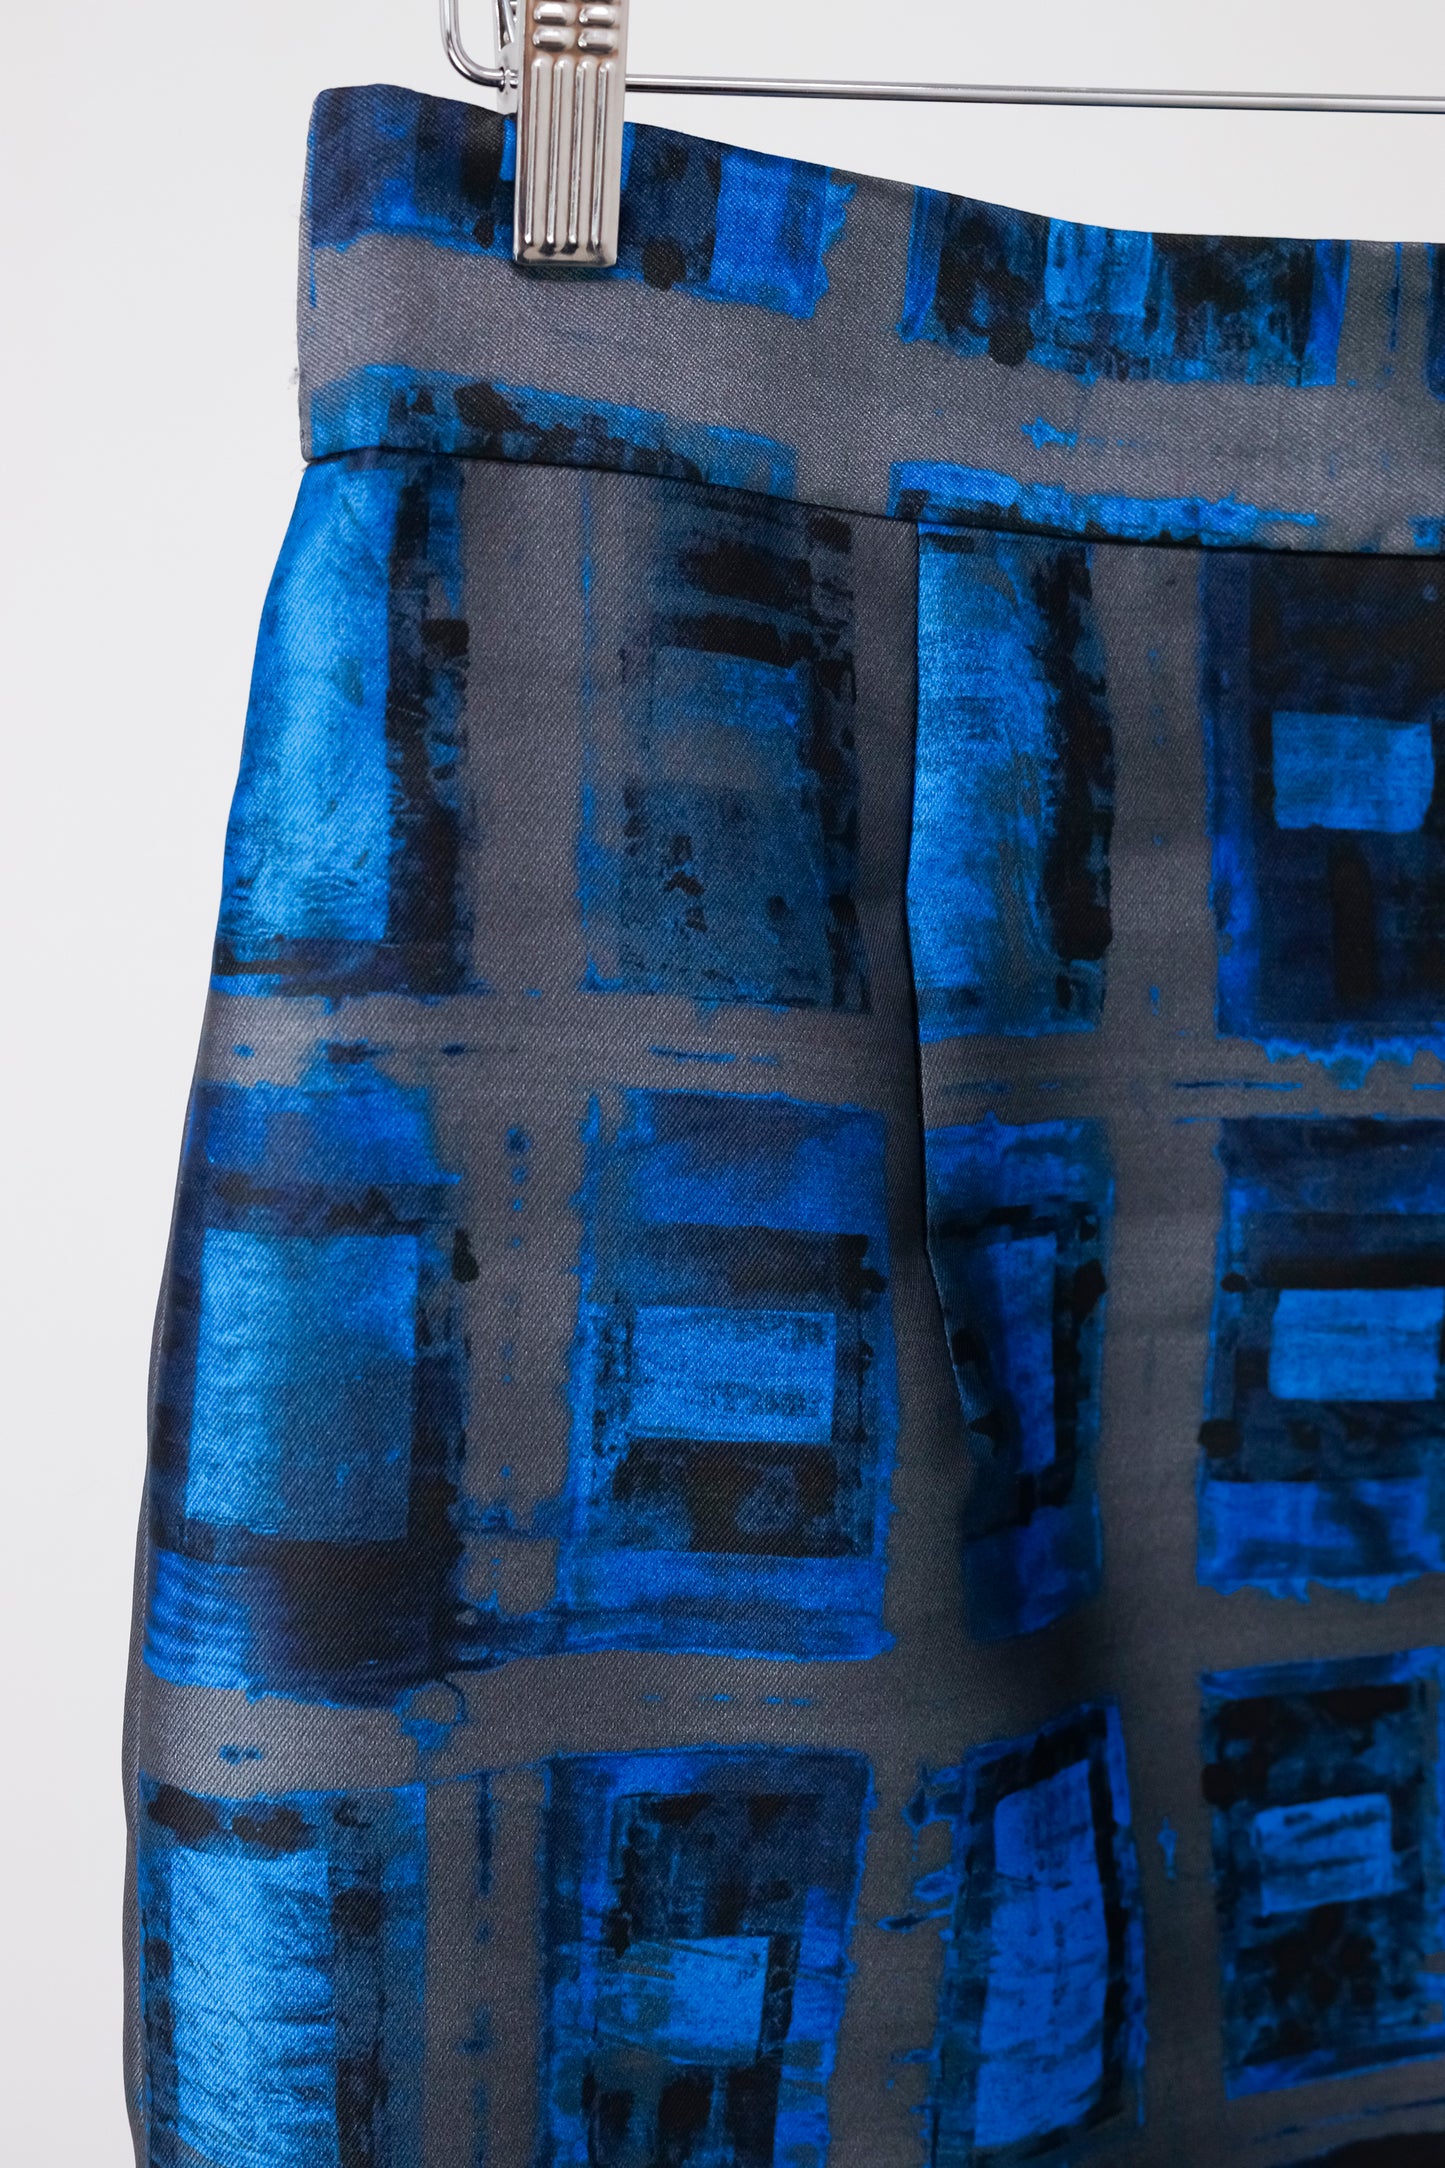 Milly Blue Check Pencil Skirt